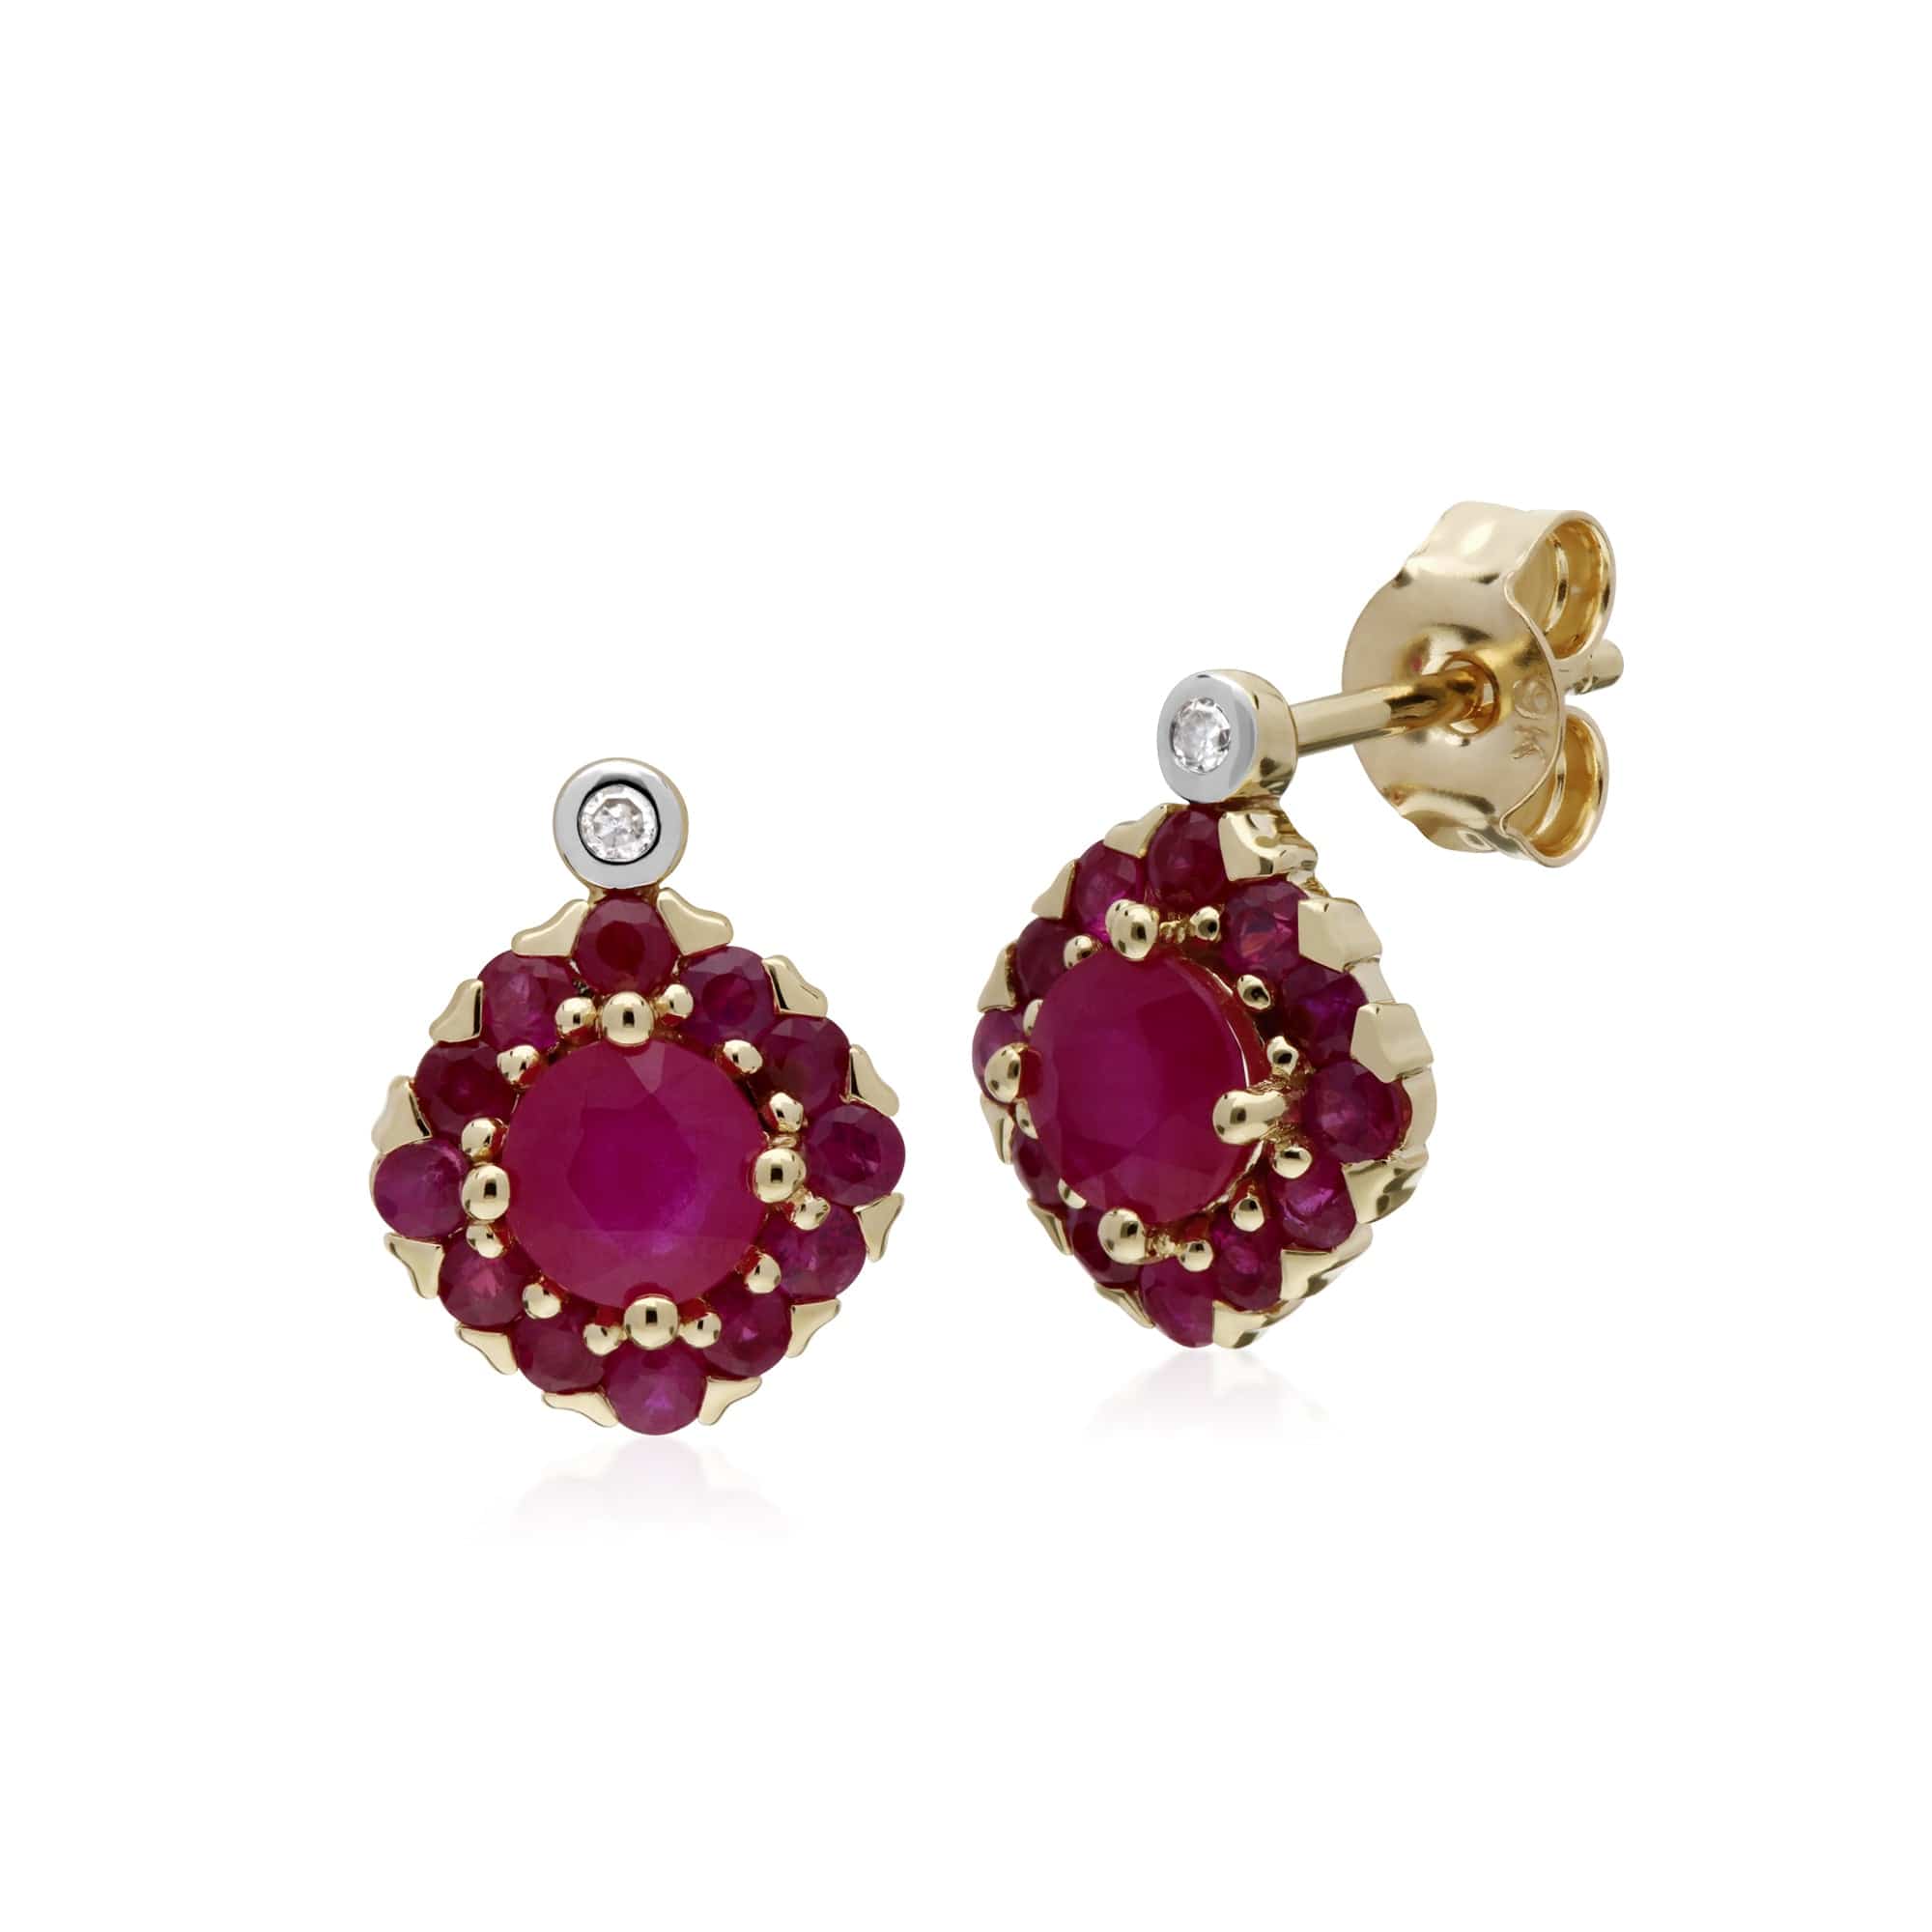 135E1571019-135P1911019 Classic Round Ruby & Diamond Square Cluster Stud Earrings & Pendant Set in 9ct Yellow Gold 2